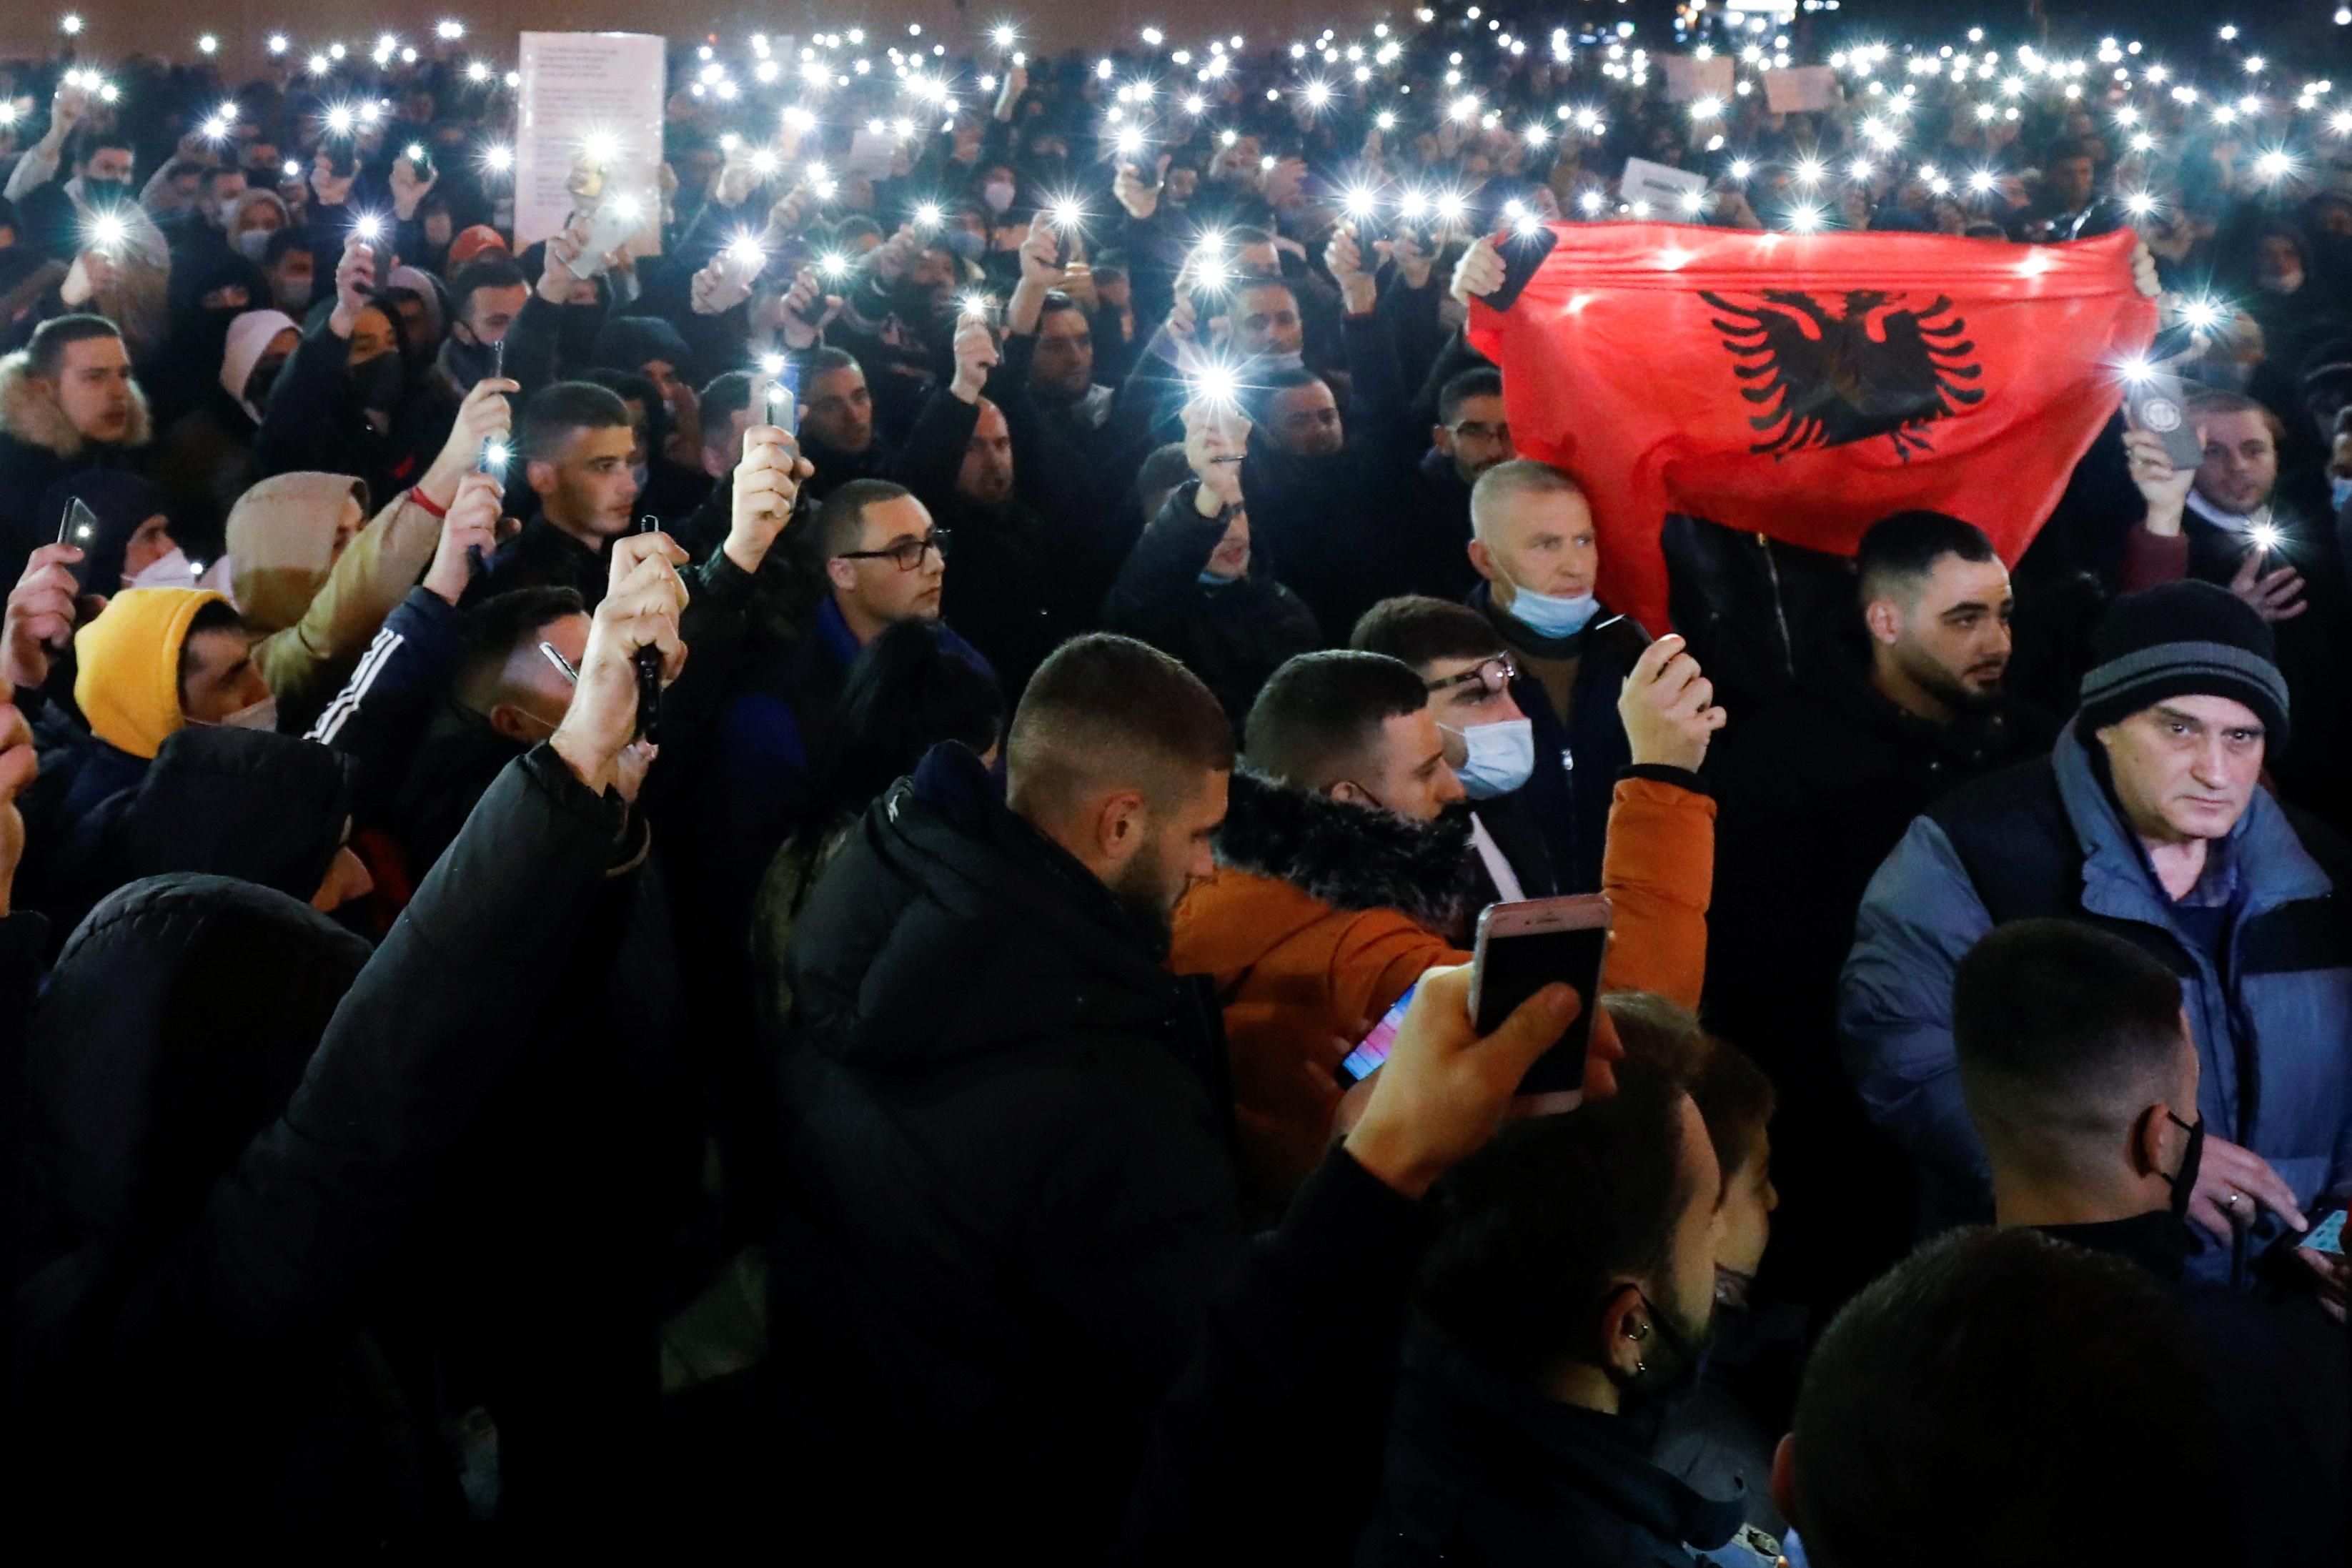 Albanians protest after police shoot dead man for violating COVID-19 curfew